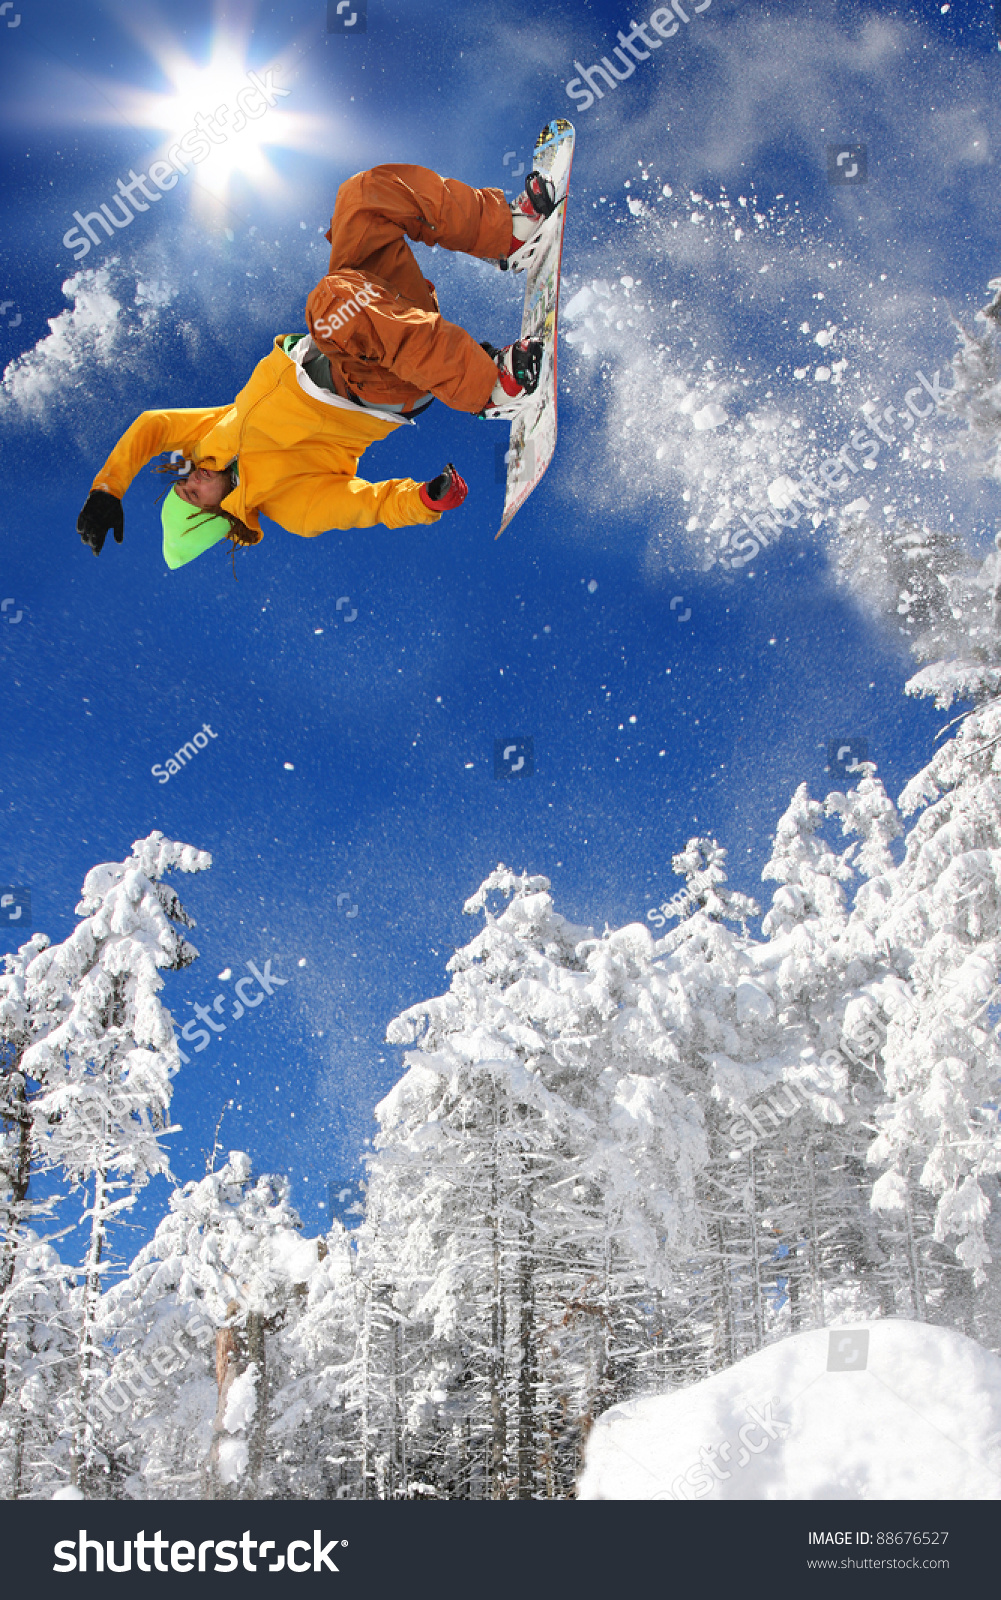 Snowboarder jumping against blue sky #88676527